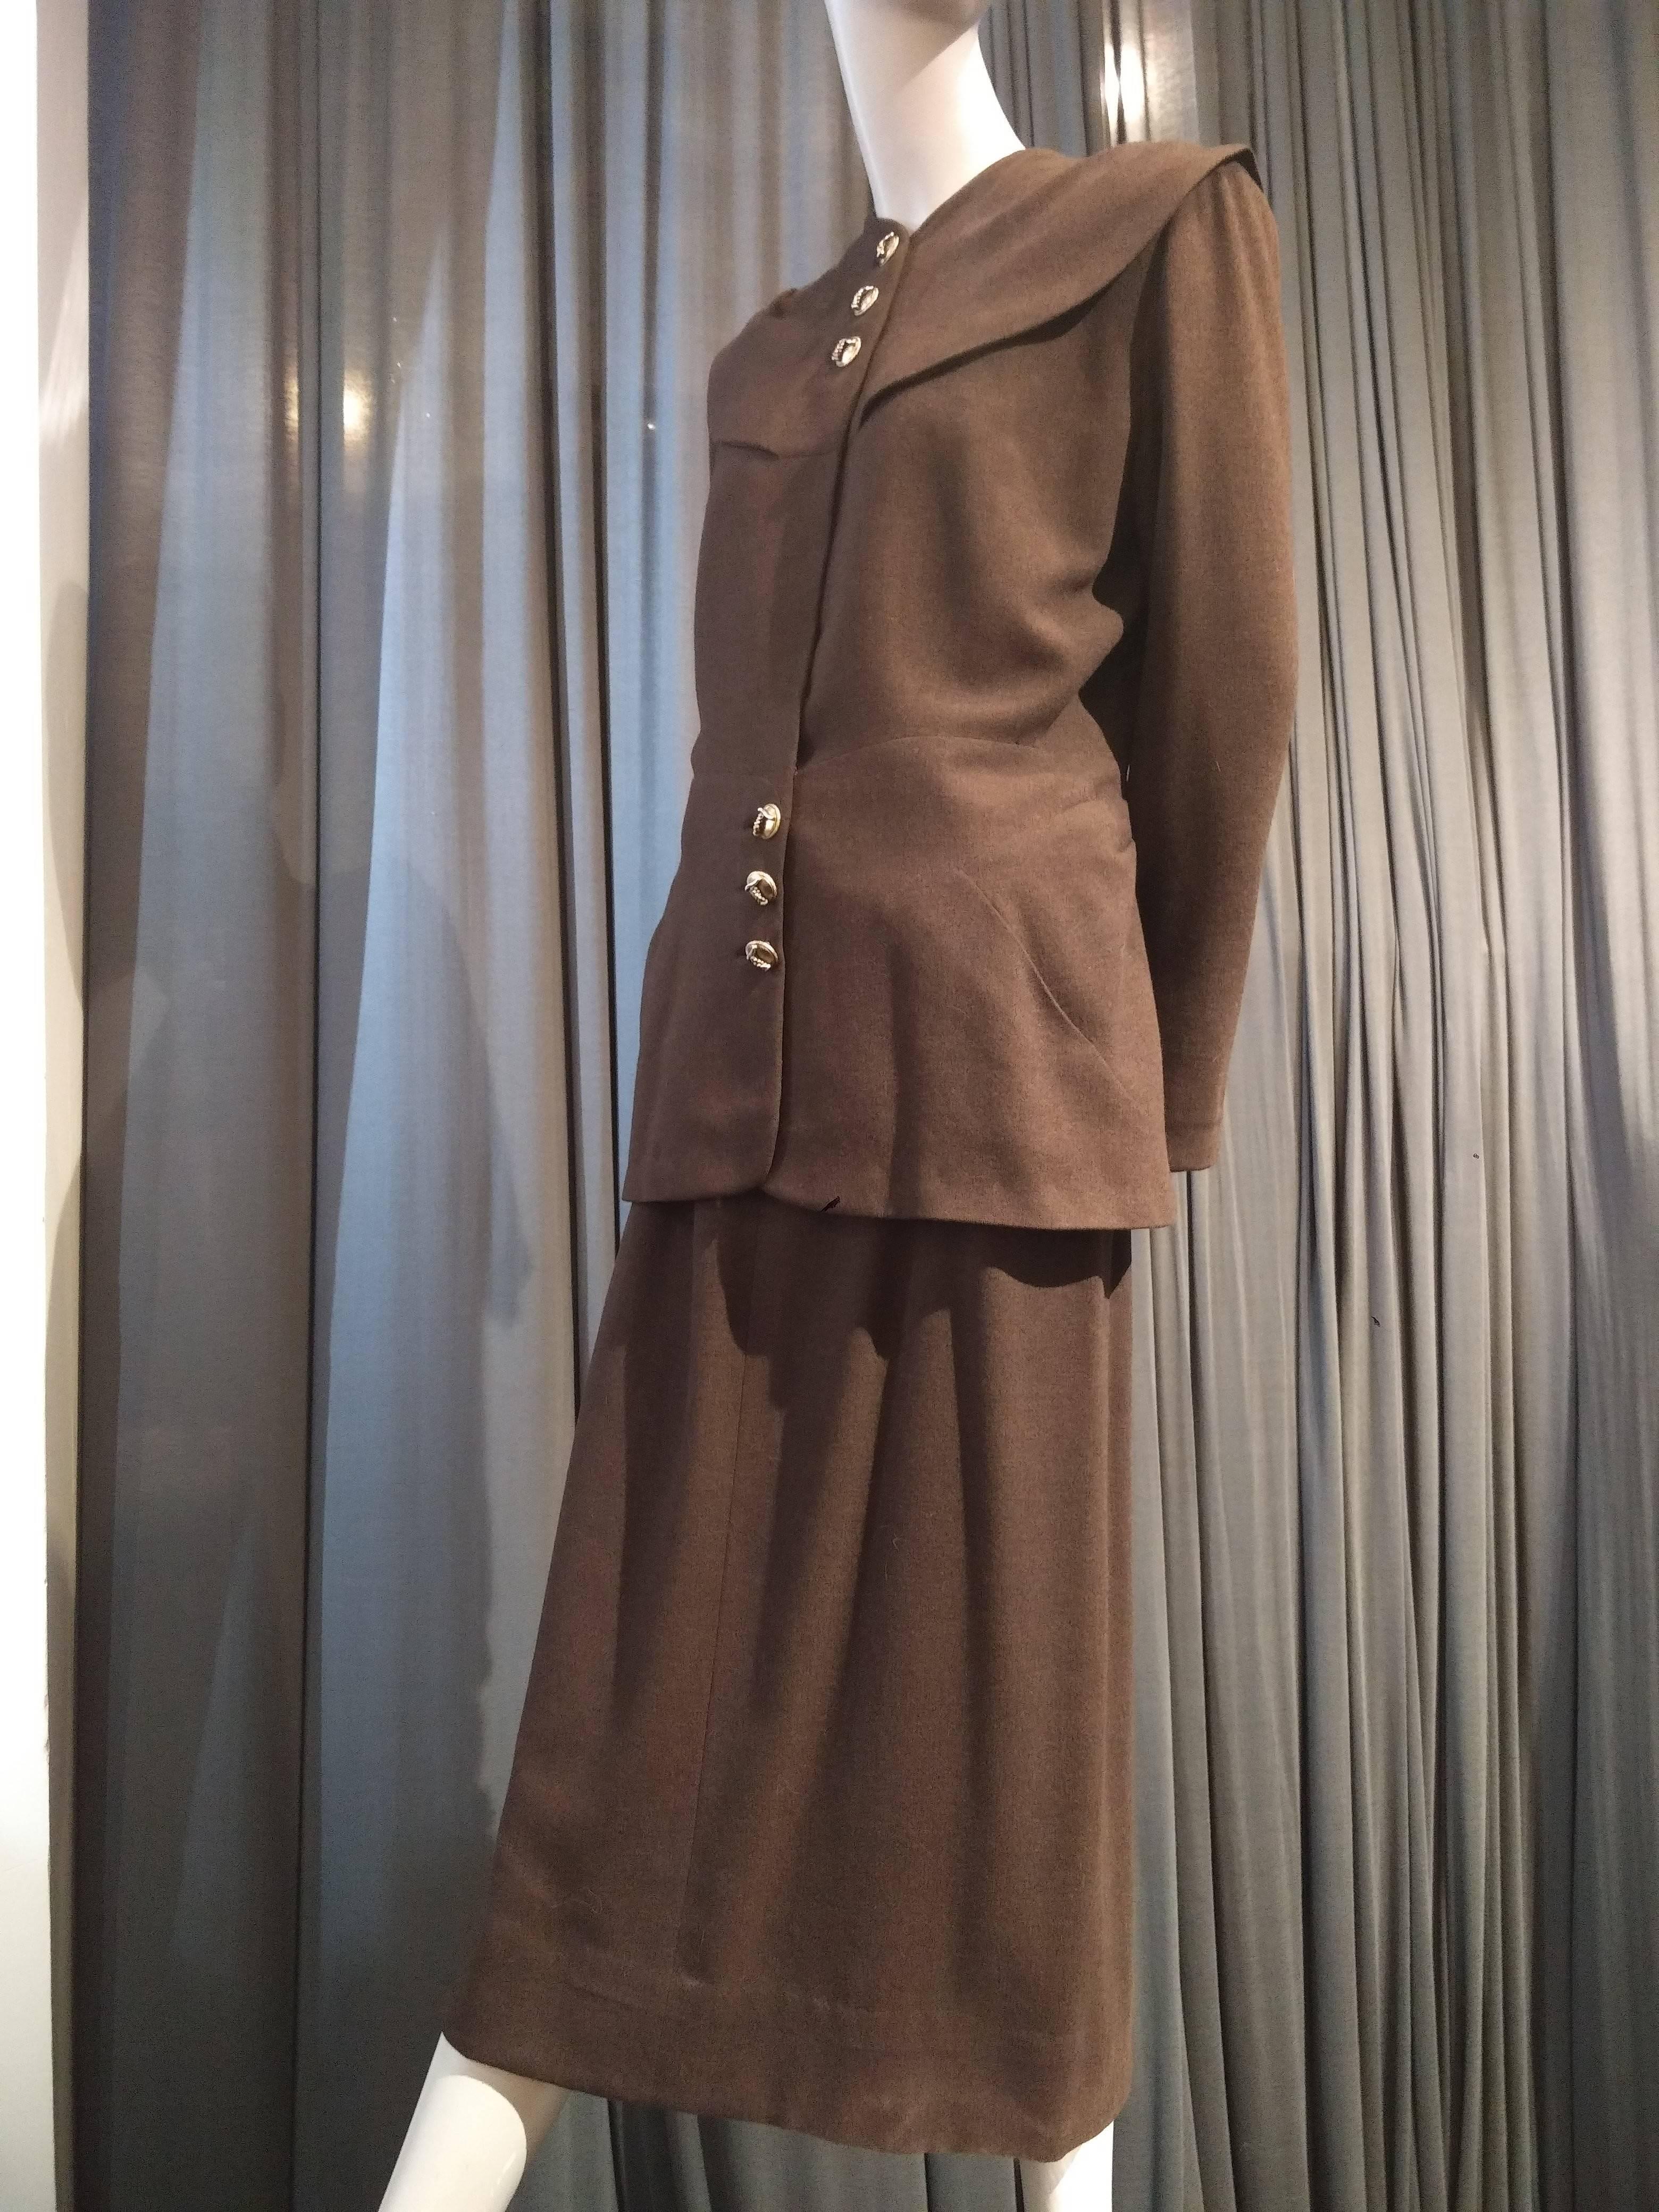 Women's 1940s Adrian Original Chocolate Brown Wool Suit w Large Rounded Collar / Caplet